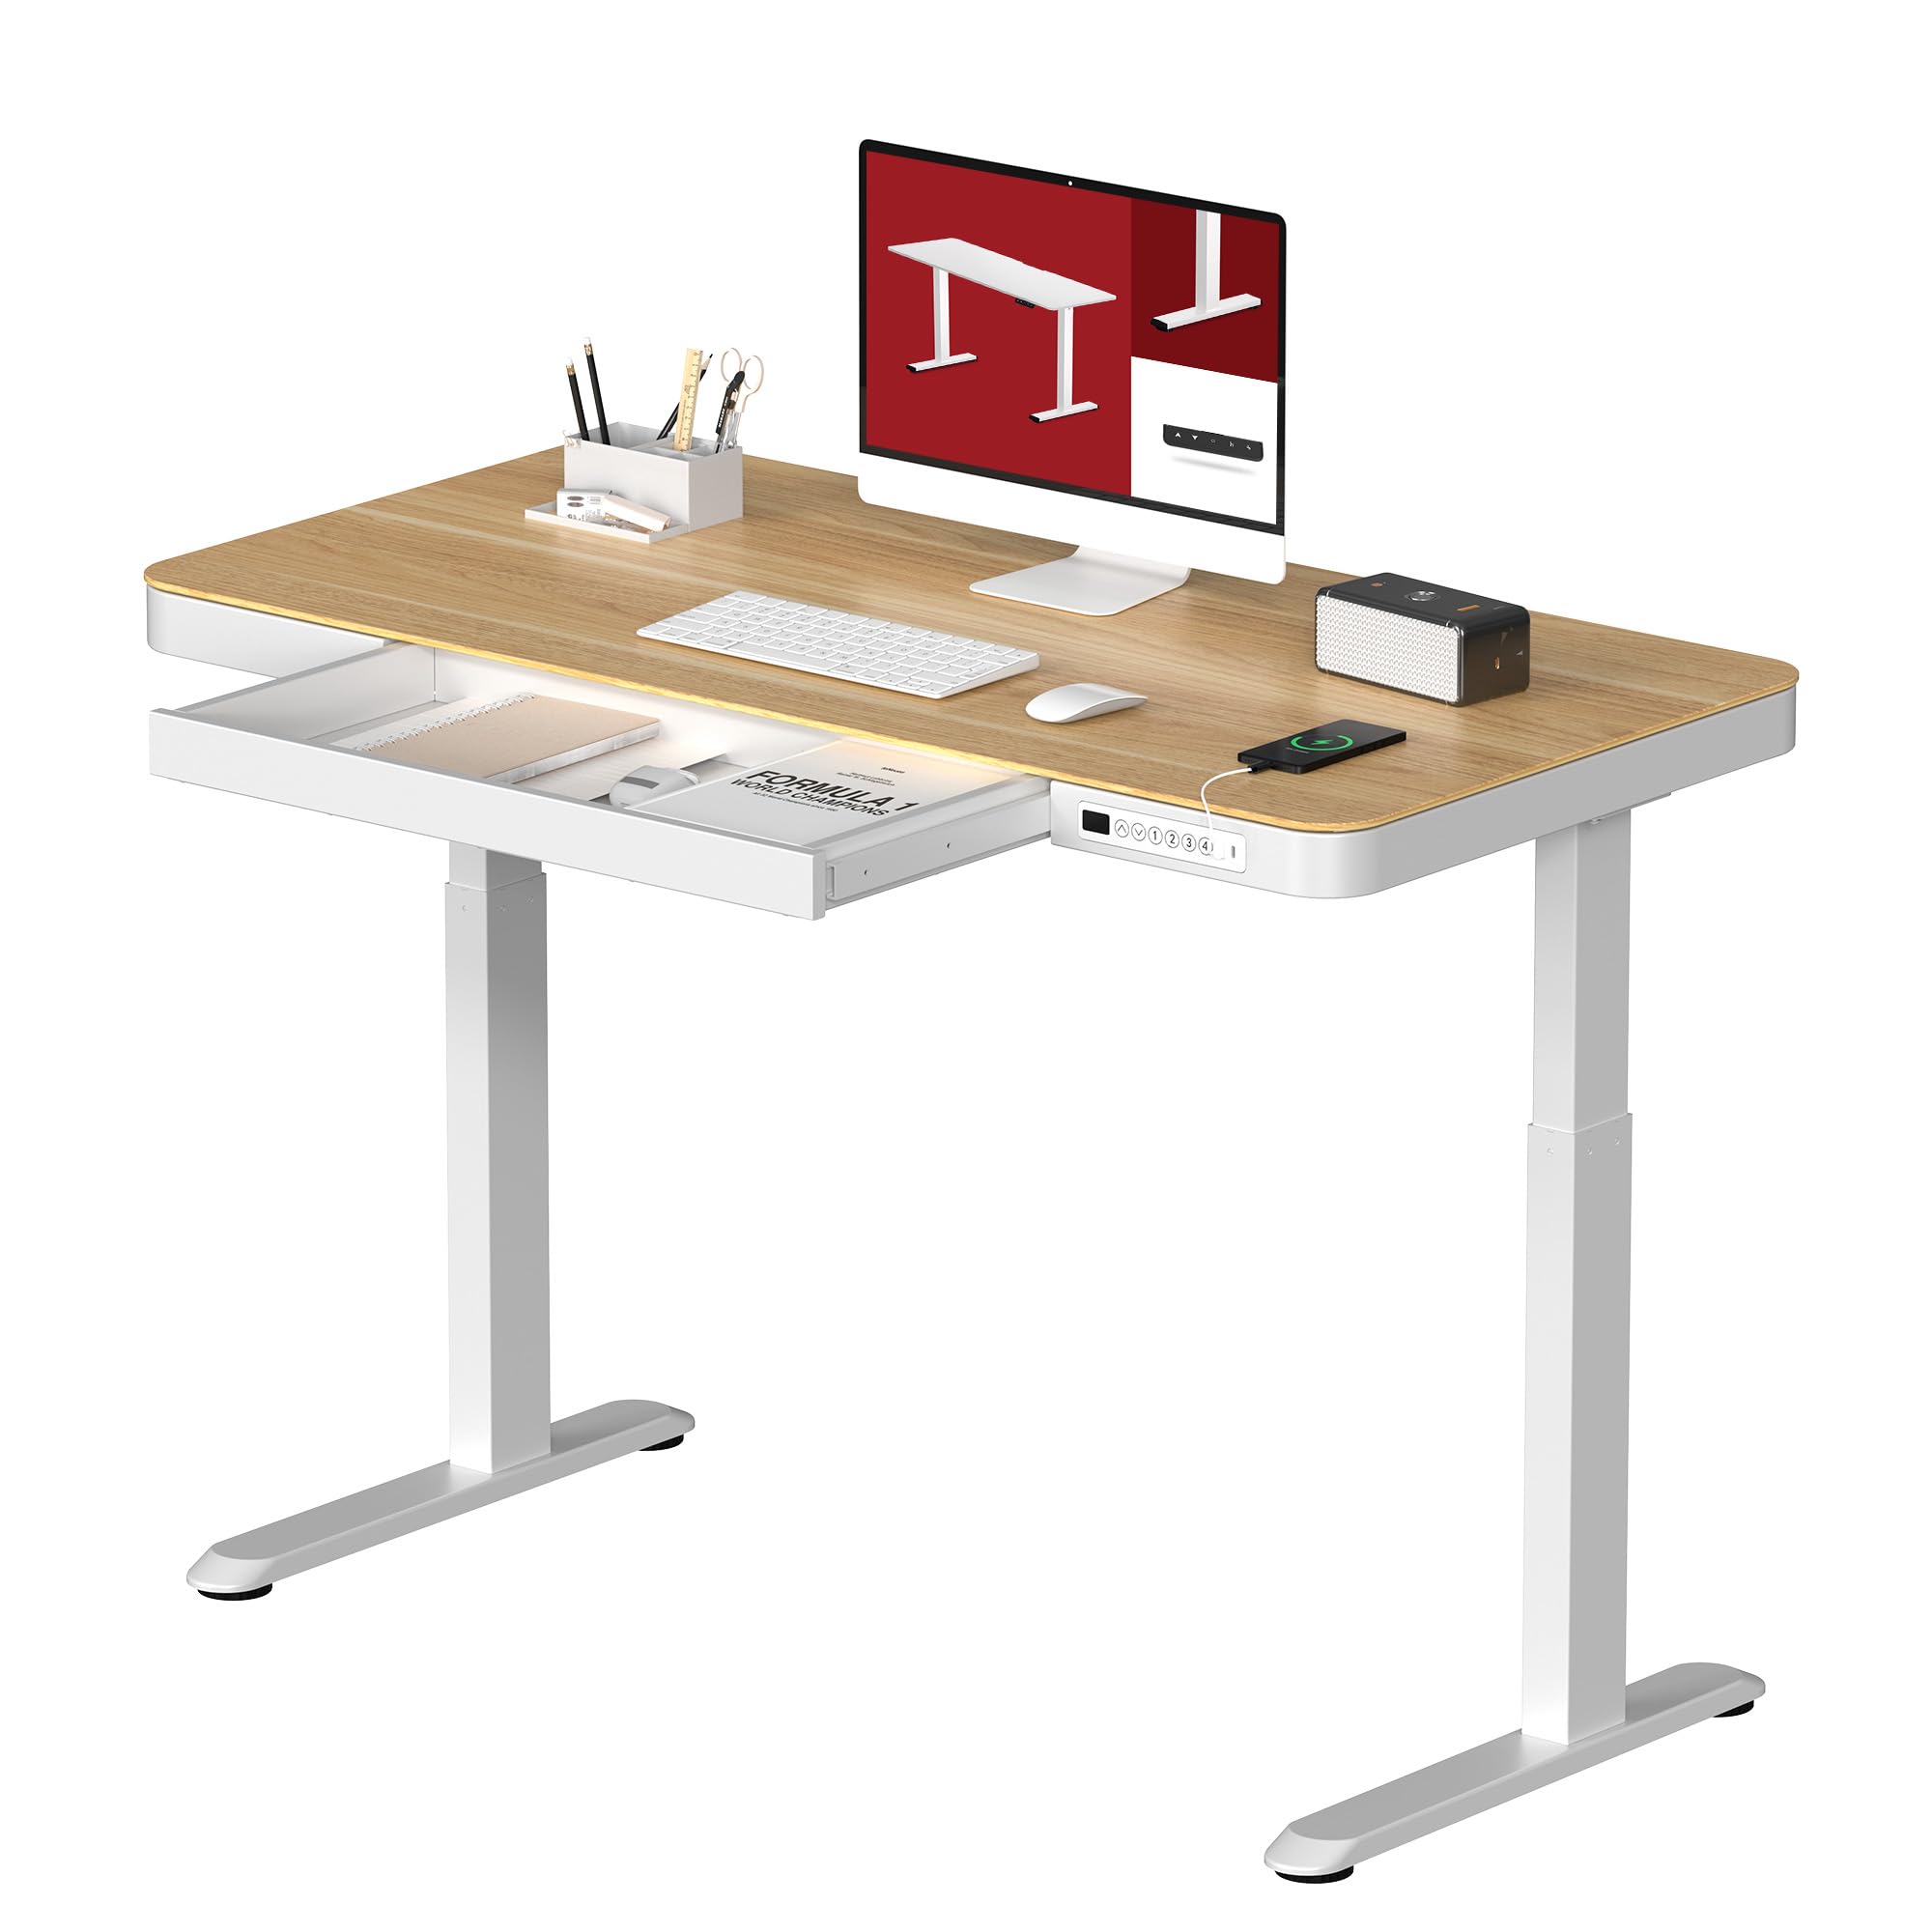 SANODESK Standing Desk with Drawer, Storage & USB Ports (48 inch Maple Wood Tabletop/White Frame) $194.39 + Free Shipping w/ Prime